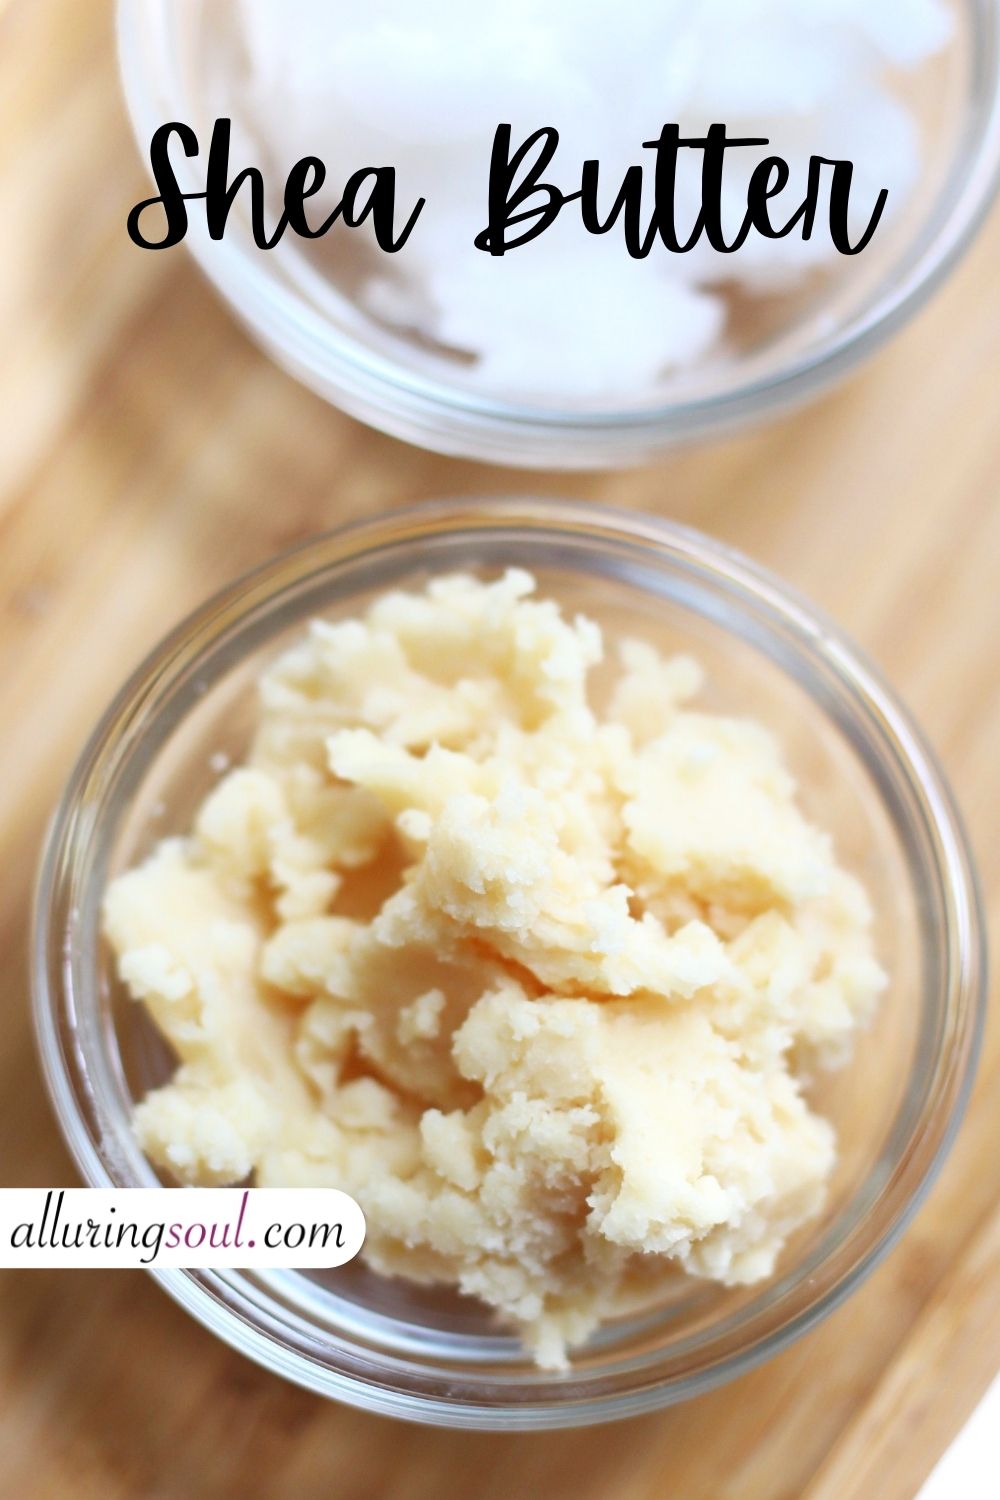 Shea Butter Vs Coconut Oil (And Which is best for Moisturiser?)